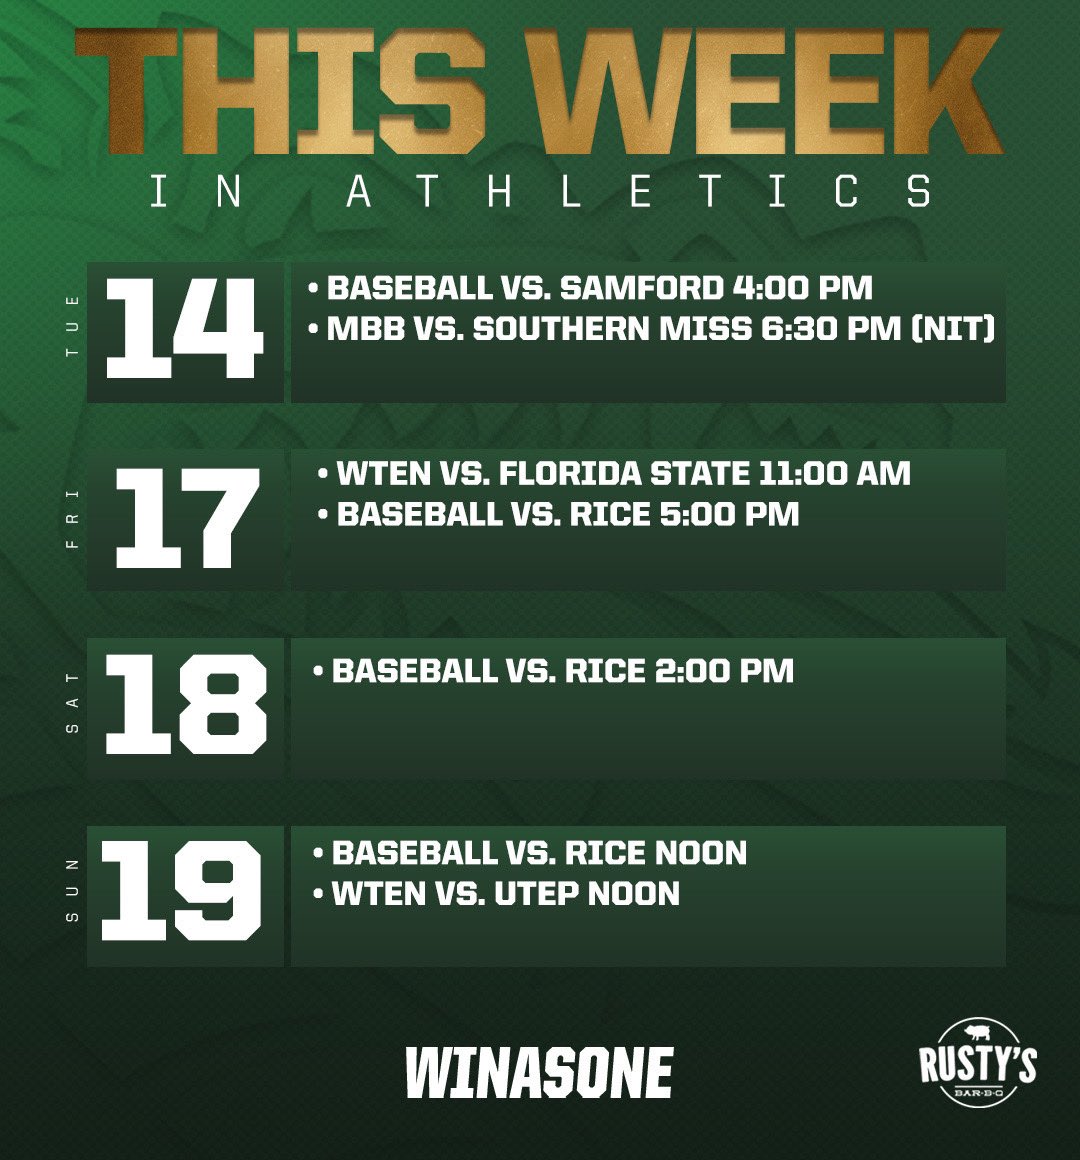 🏀, ⚾️ , & 🎾 action all at home this week for the Blazers! #WinAsOne